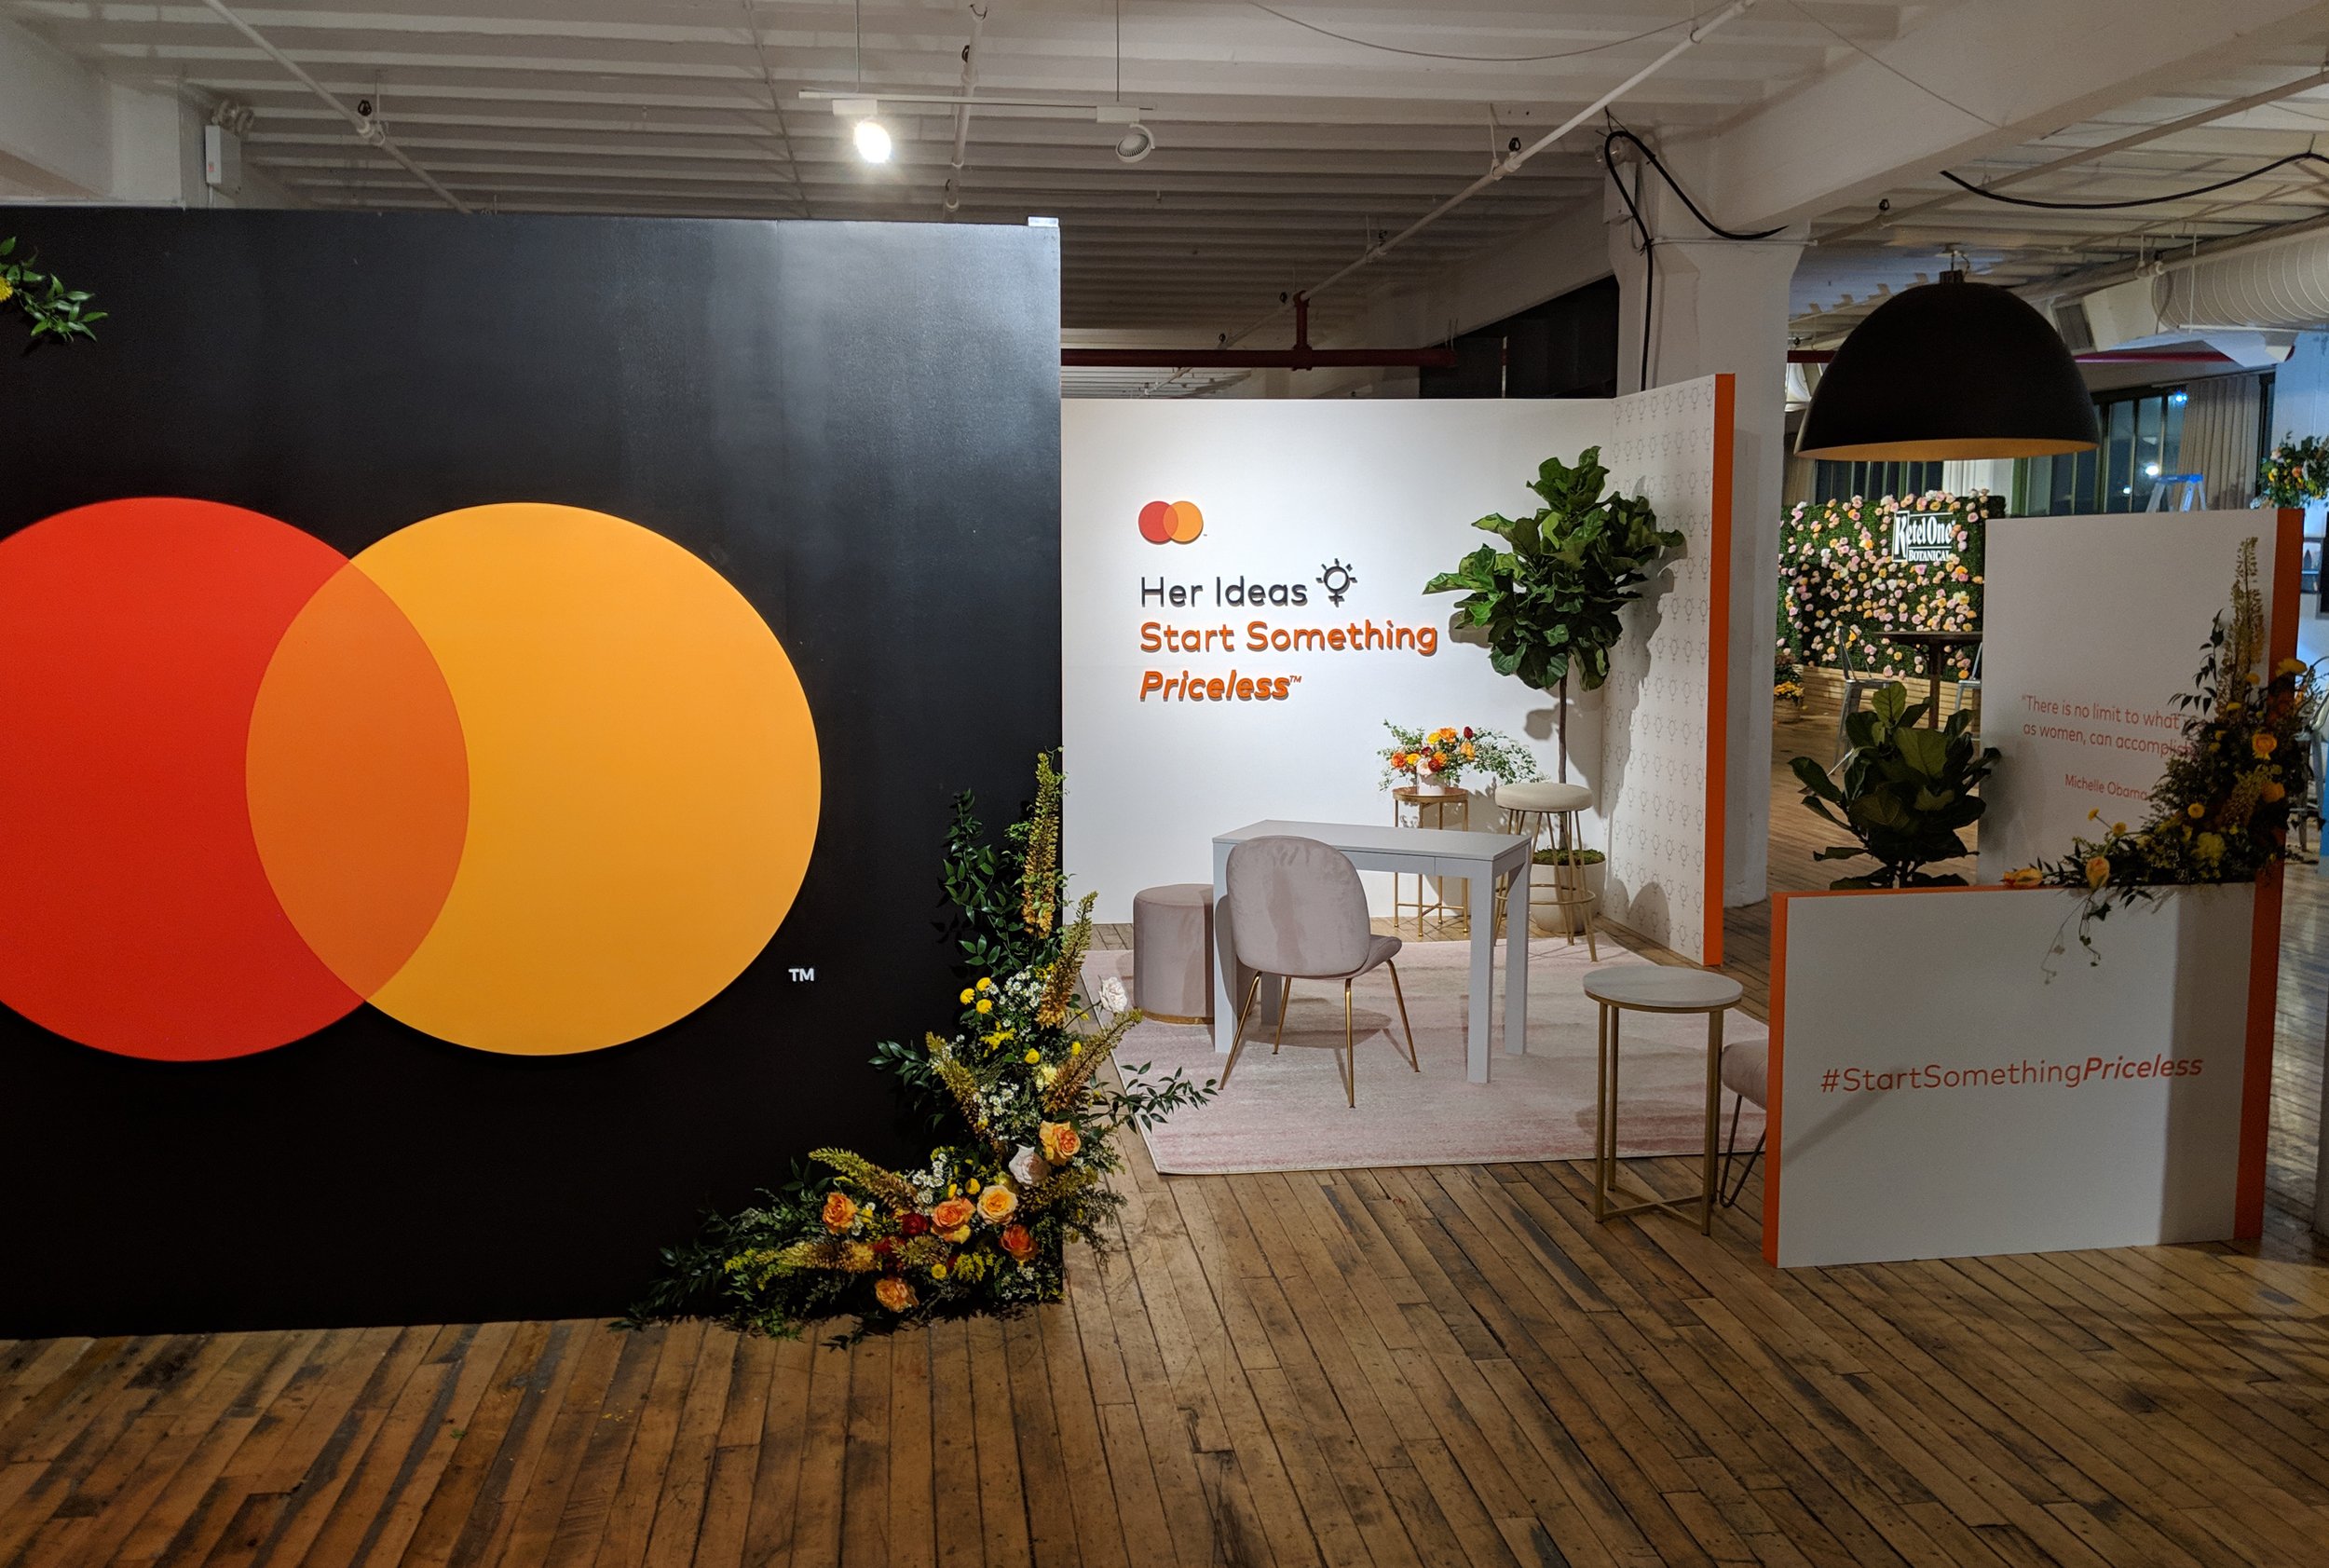 Mastercard - Create and Cultivate